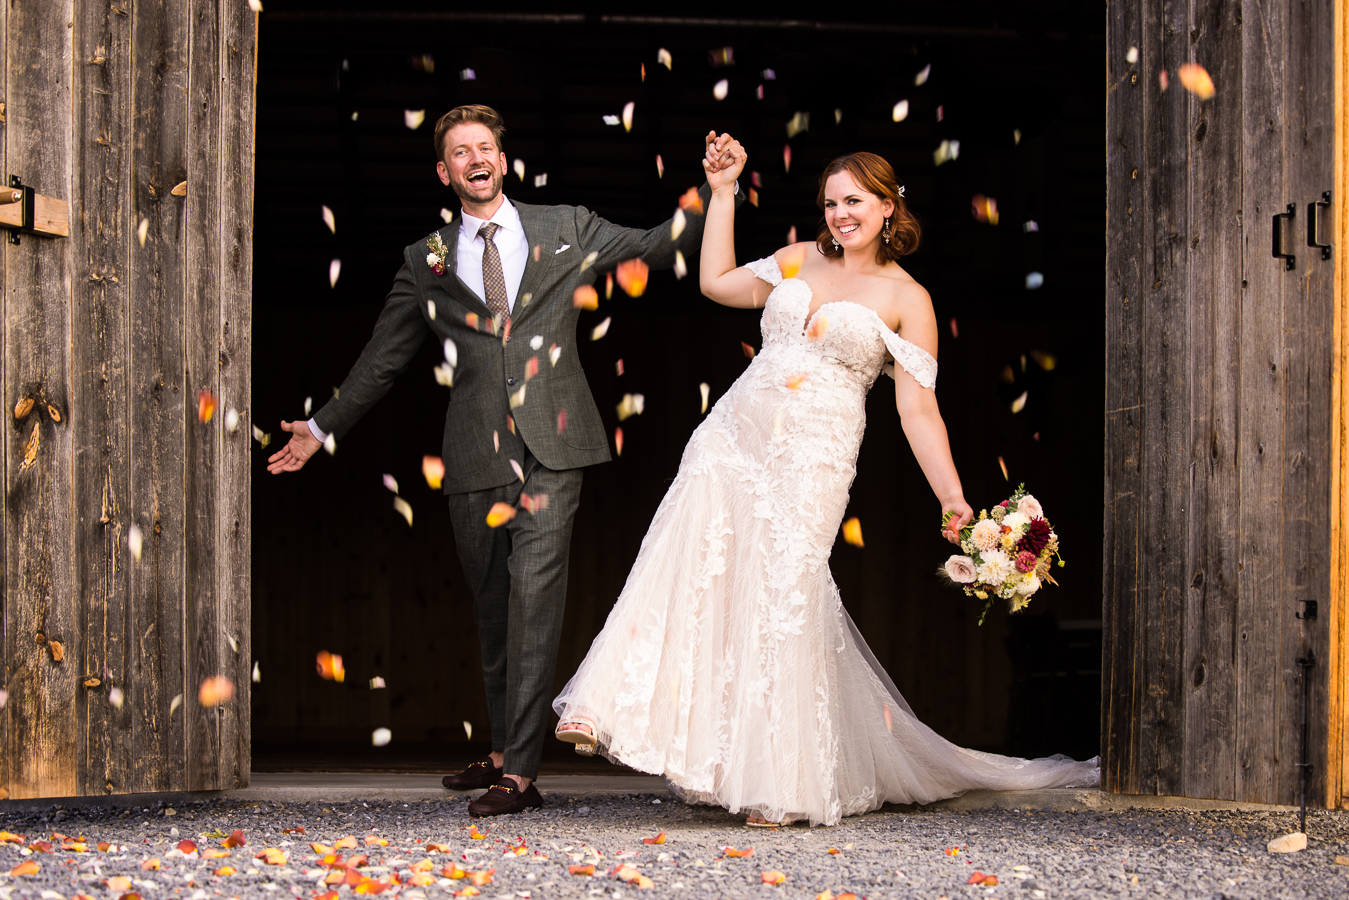 creative, fun vibrant image of the couple walking out of the barn from their wedding ceremony with vibrant colorful petals being thrown as they walk out of this warfordsburg, pa wedding venue, alpine acres